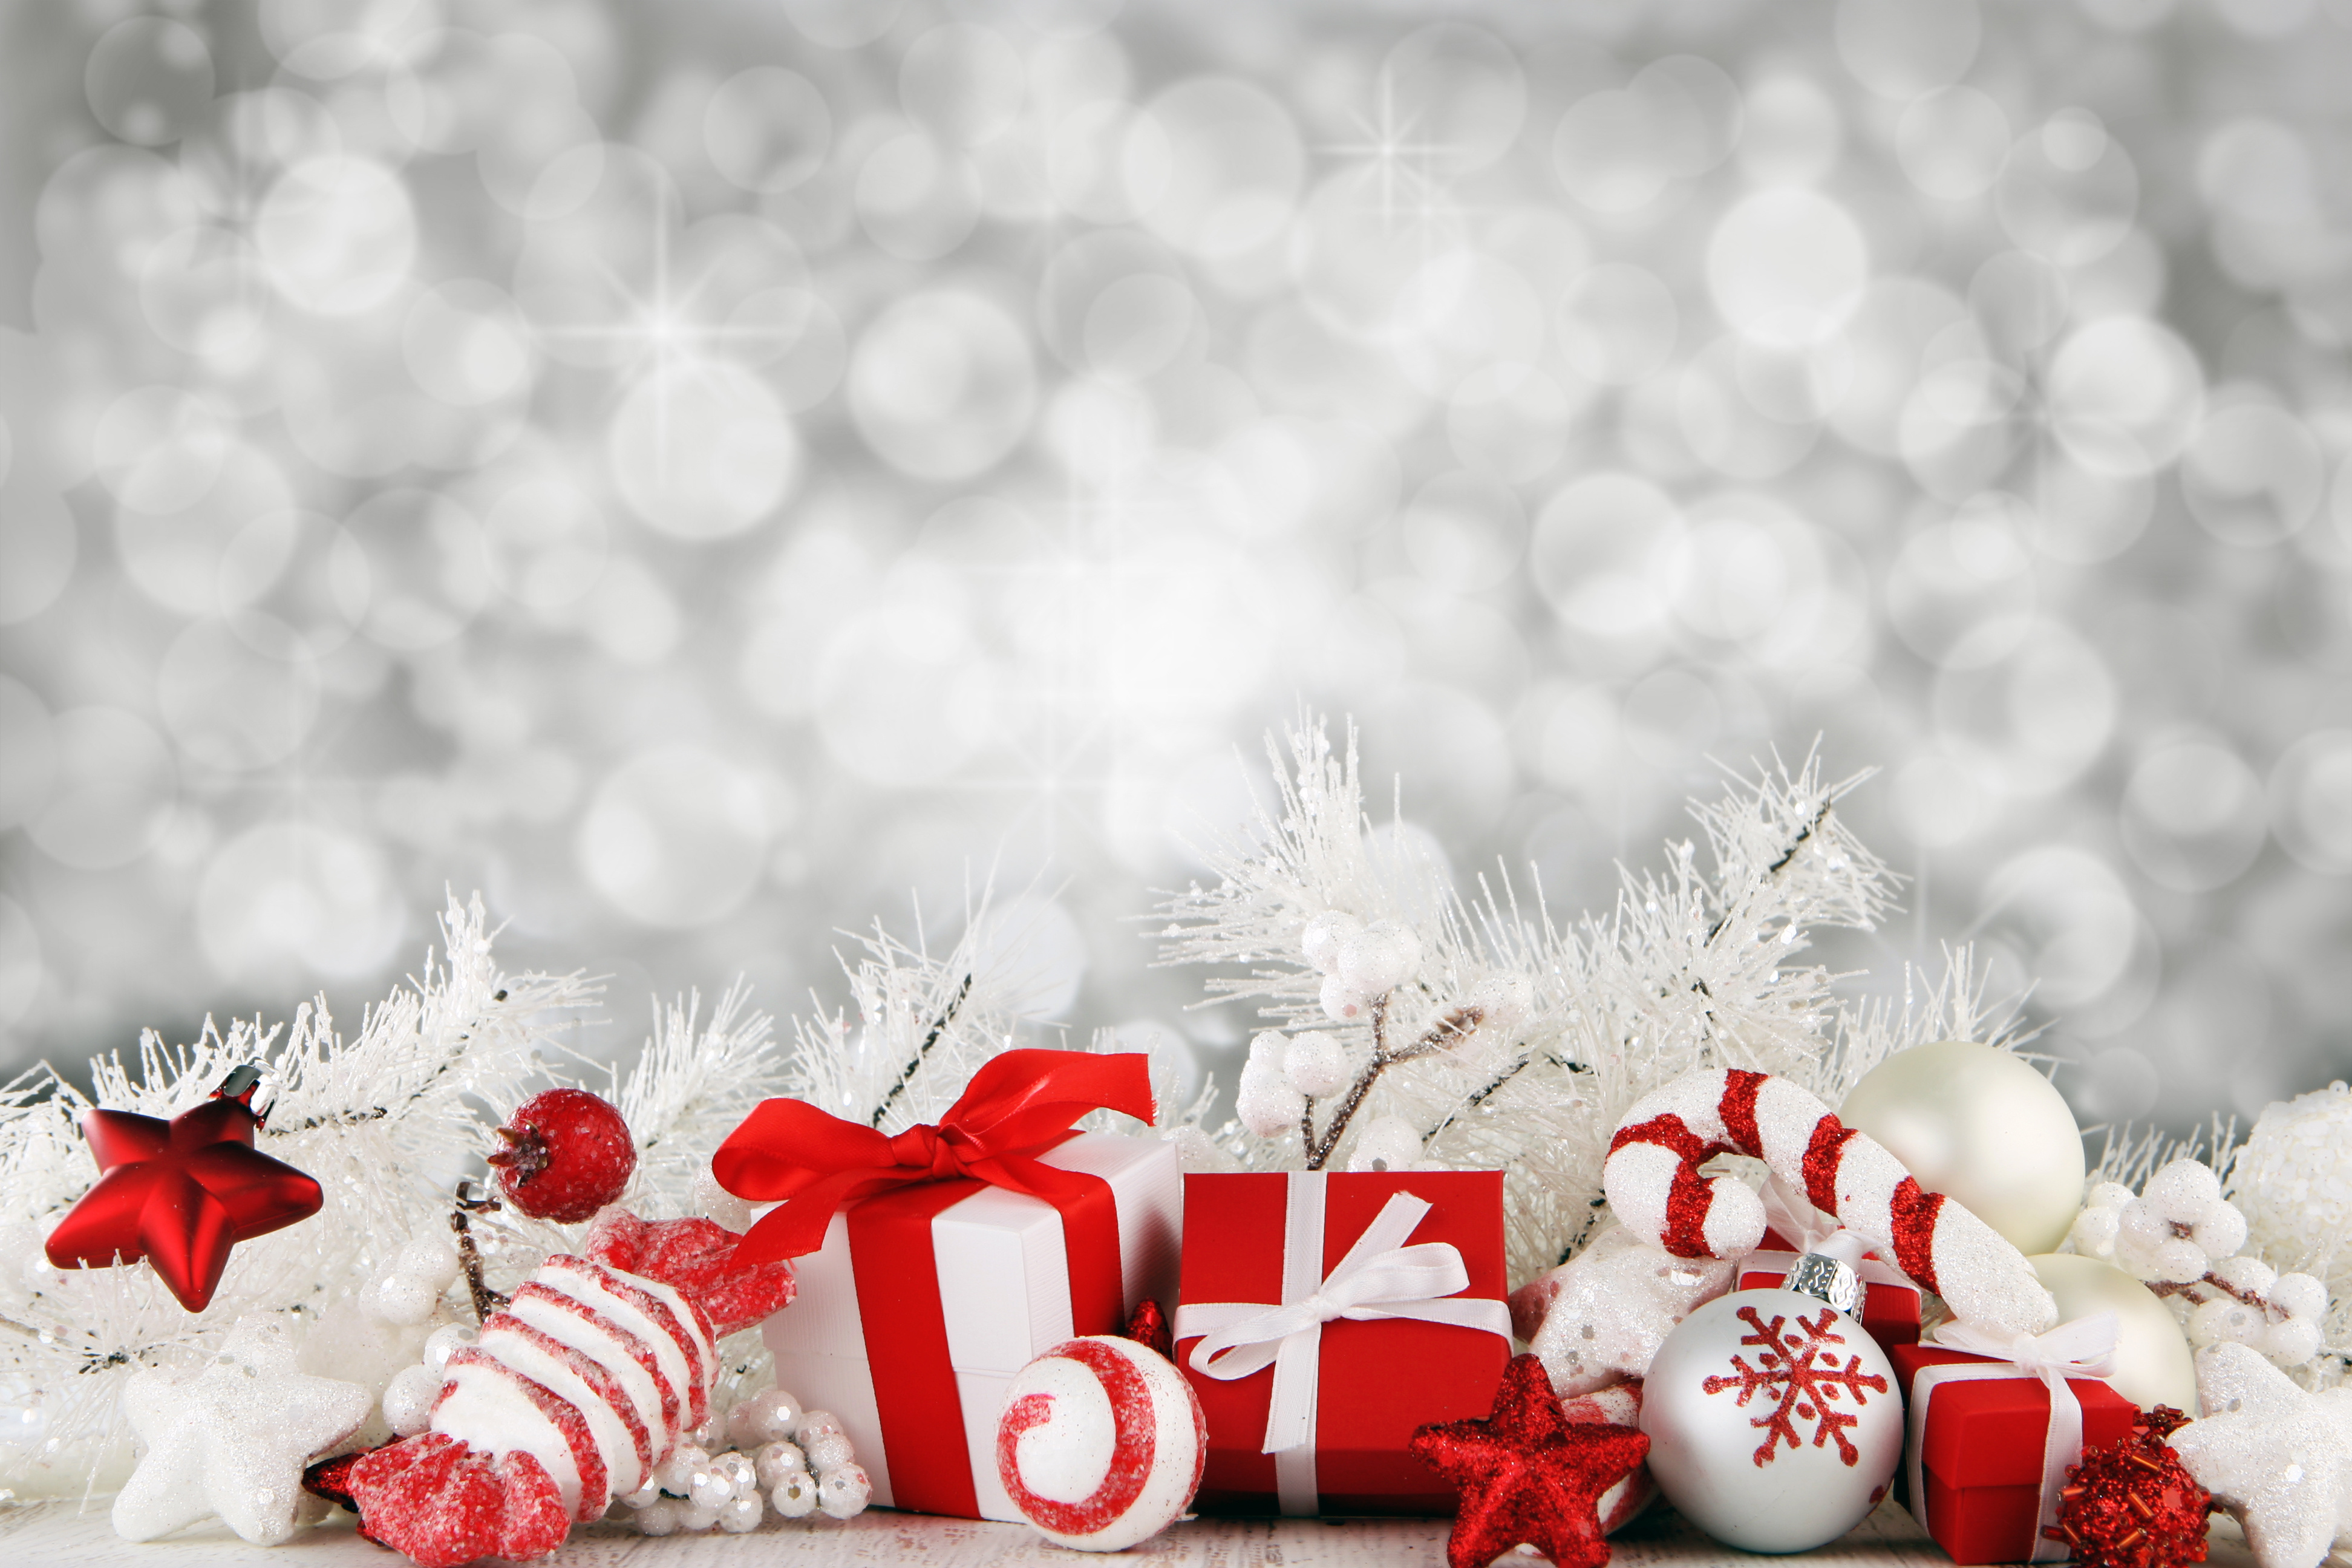 background images for christmas - Ideal.vistalist.co